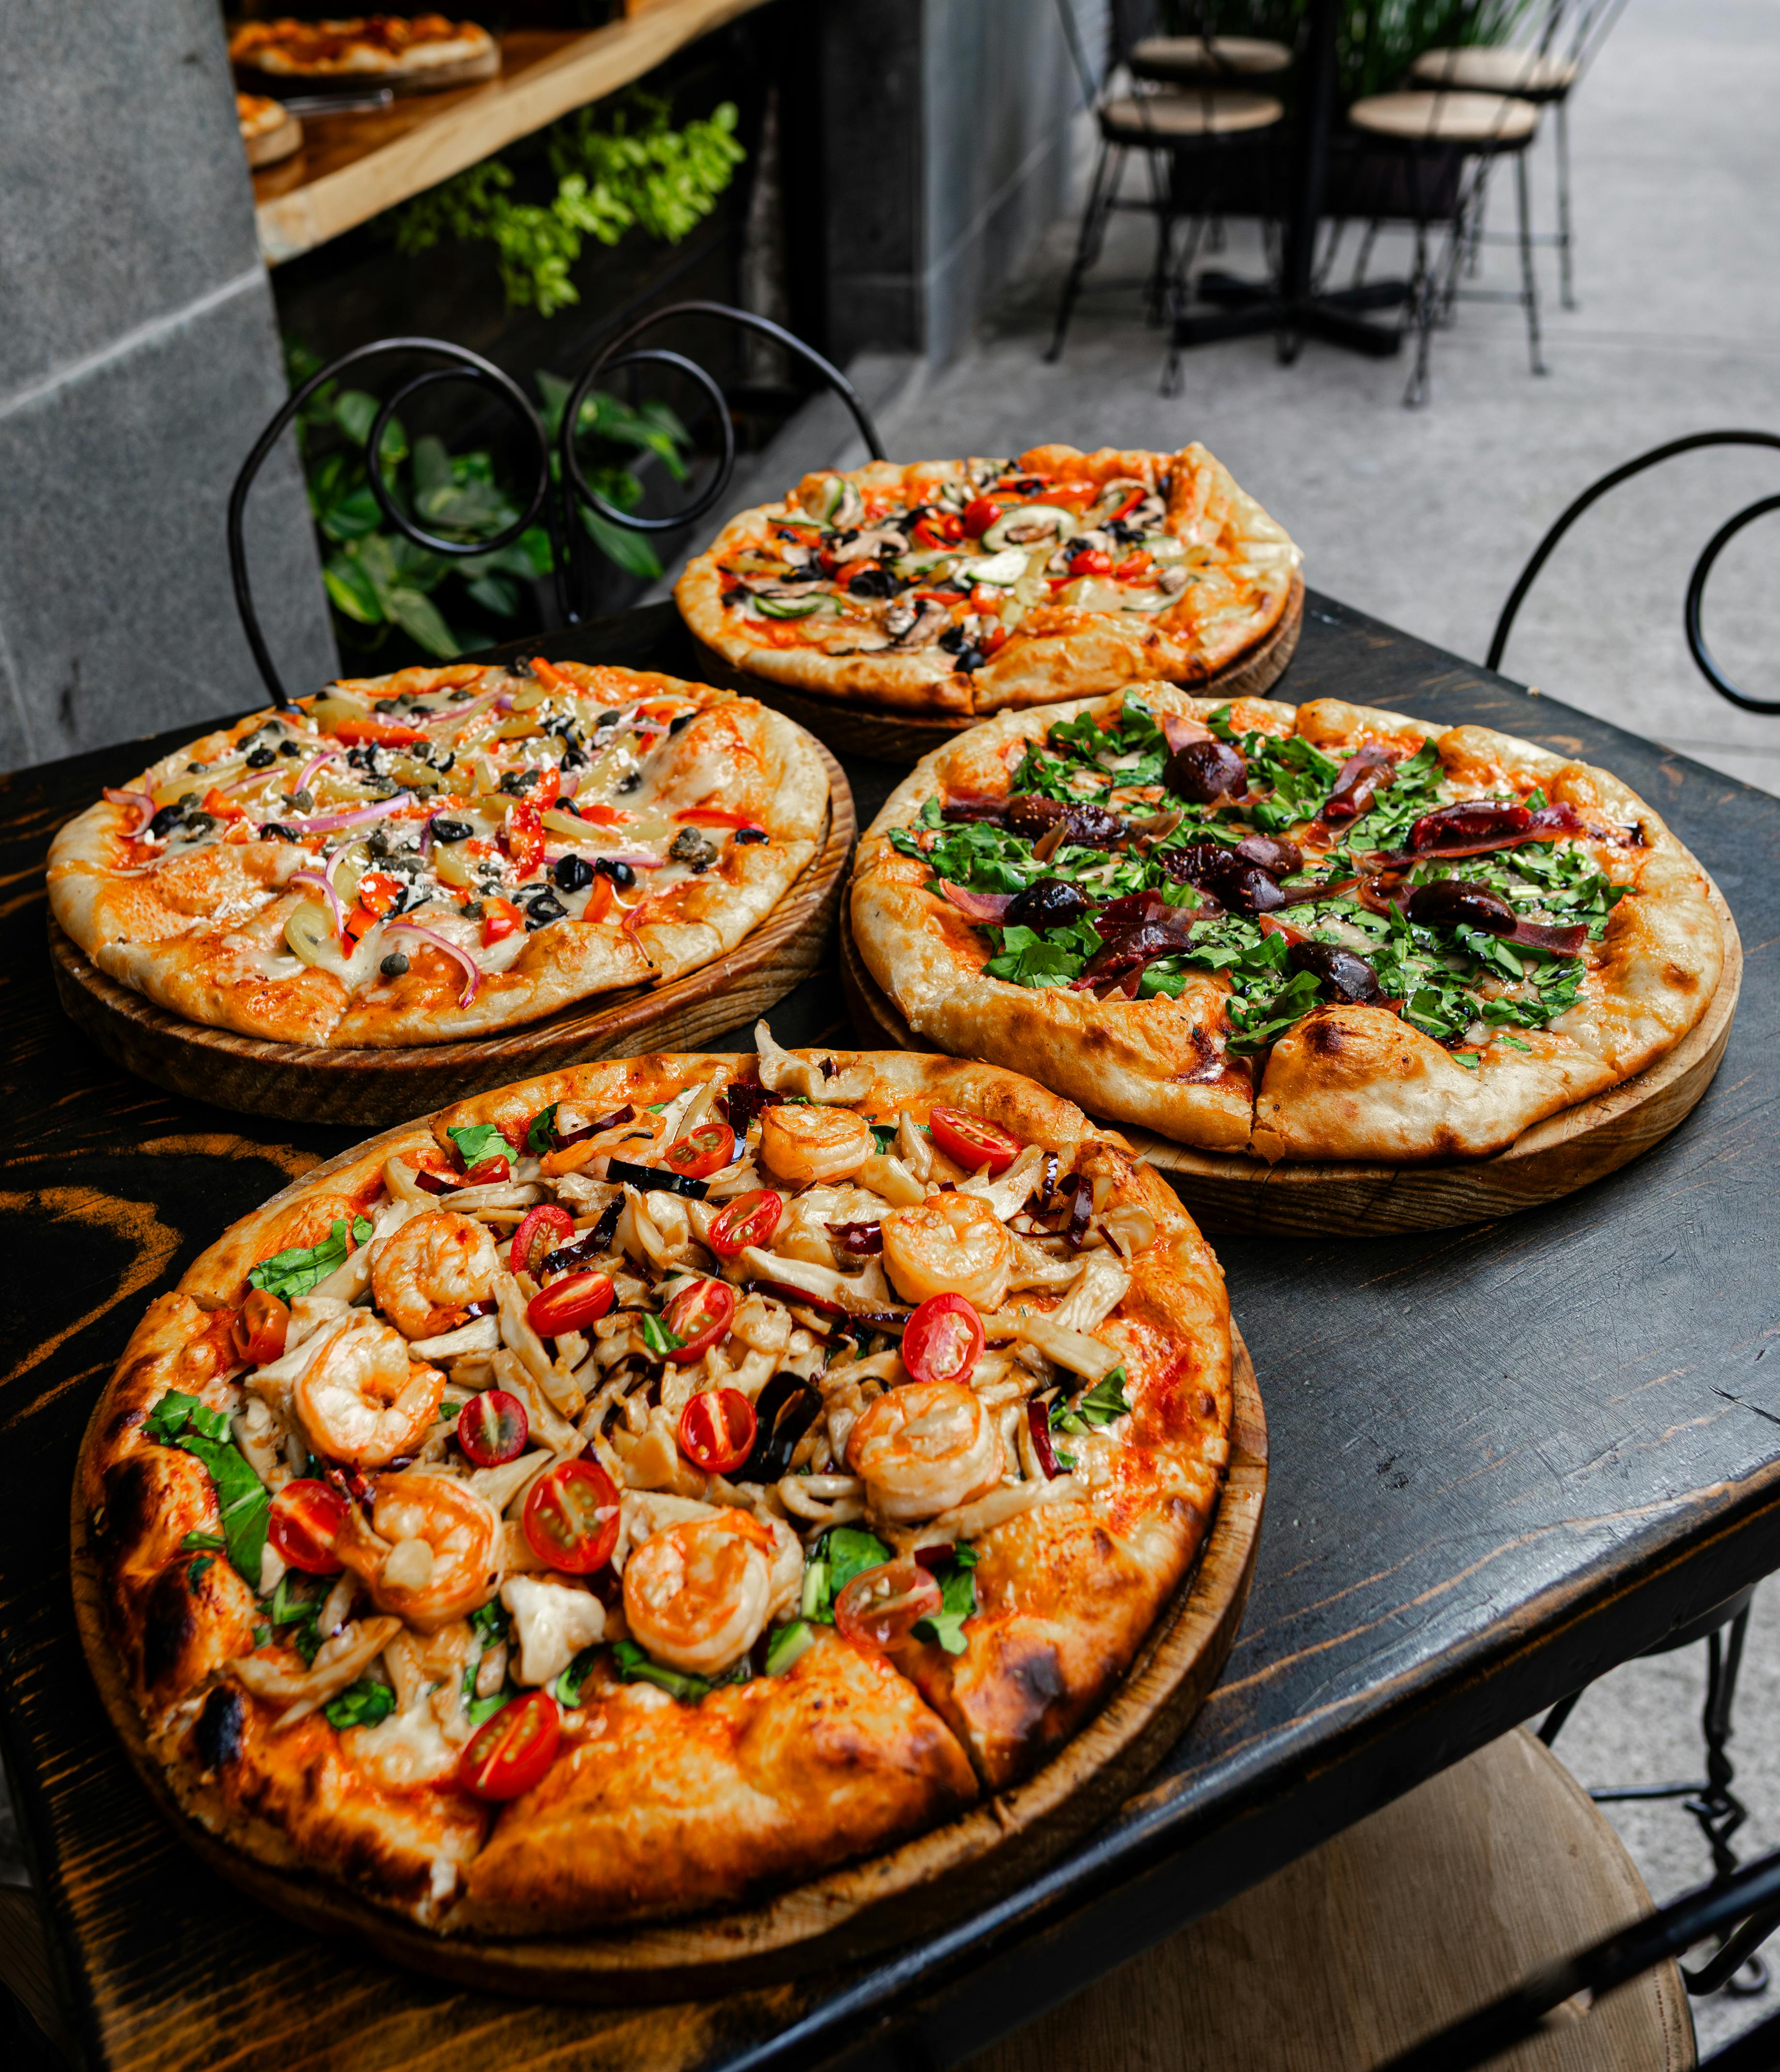 reasons why you should visit new York city known for its pizza